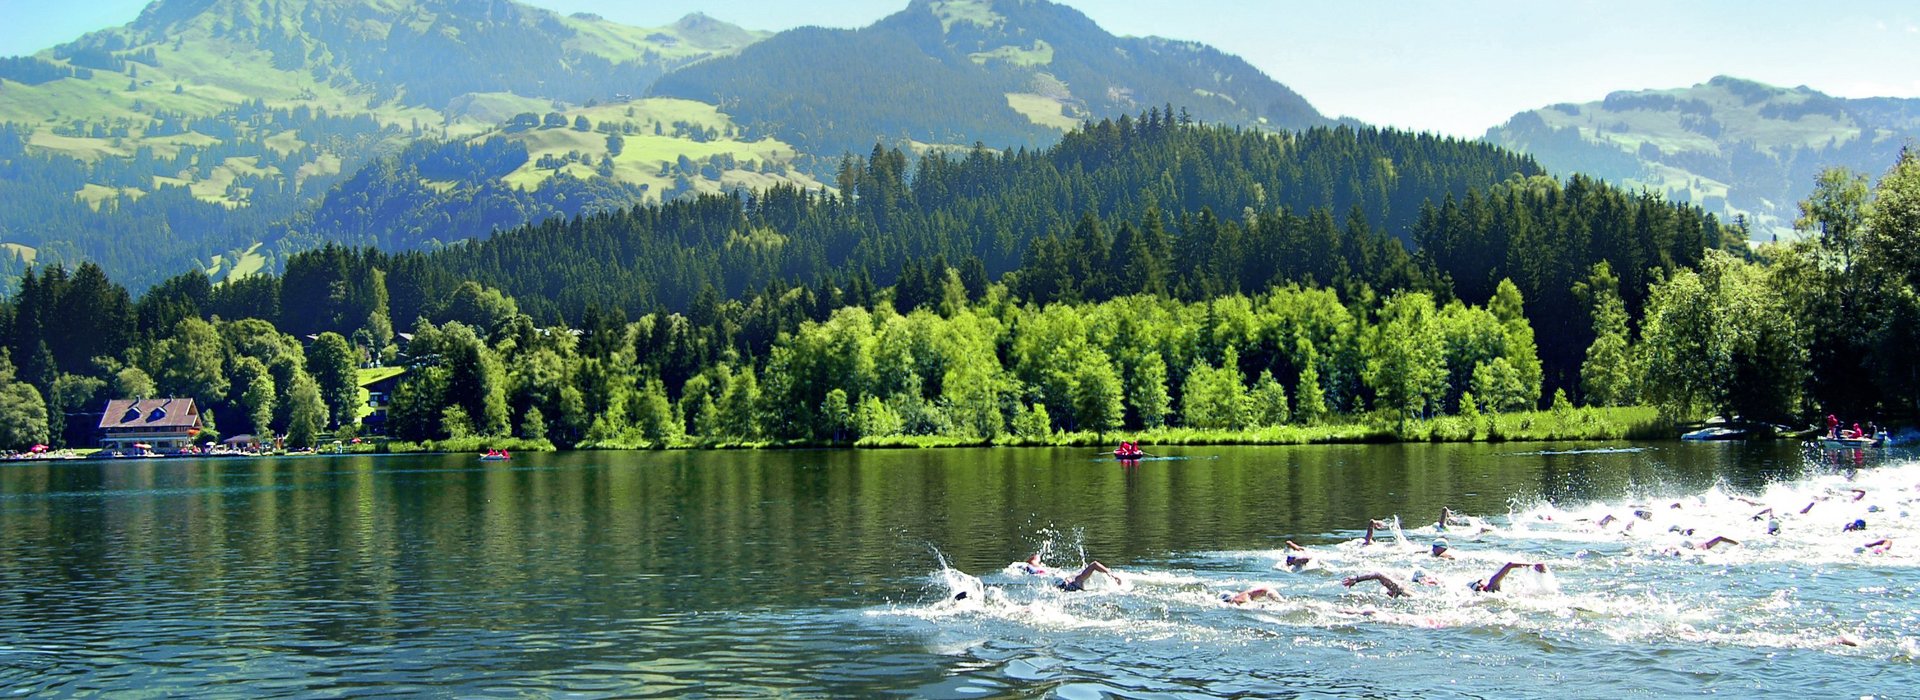 Triathlets in the Schwarzsee